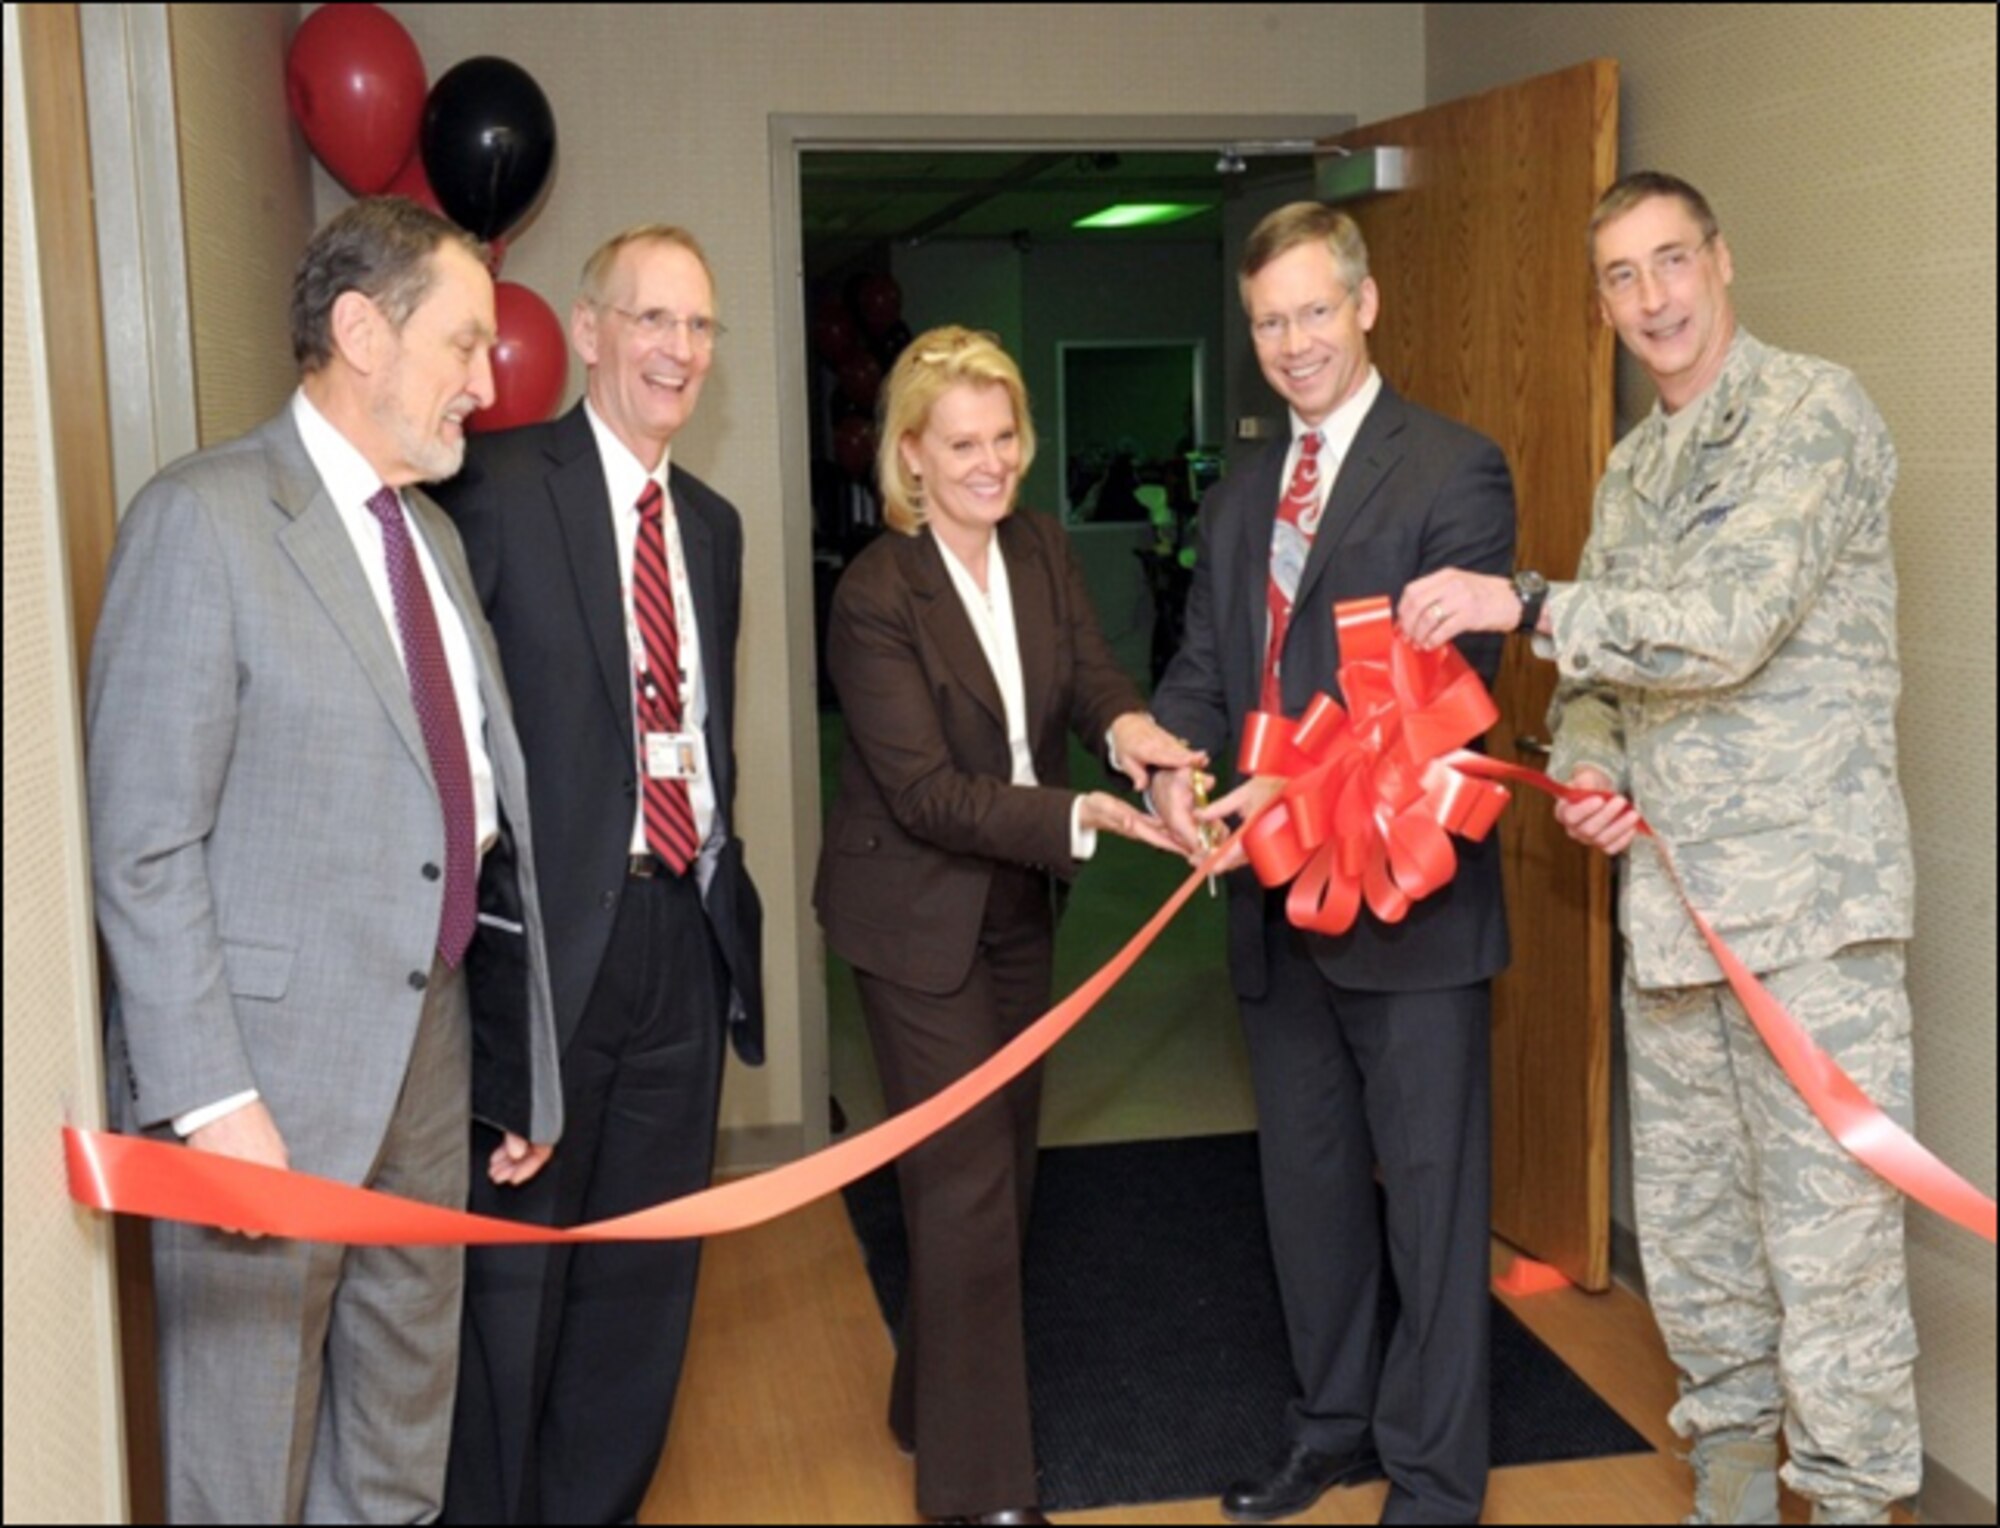 From left to right: UC College of Medicine Dean Dr. Thomas Boat; UC Health President and CEO Dr. Richard Lofgren; UC Medical Center President and CEO Ms. Lee Ann Liska; Department of Emergency Medicine Chair Dr. Arthur Pancioli; and Commander, 711th Human Performance Wing Brig Gen Timothy Jex at the ribbon cutting of the C-STARS Simulator Grand Opening. (Mr. Marvin Shelton/AFRL)